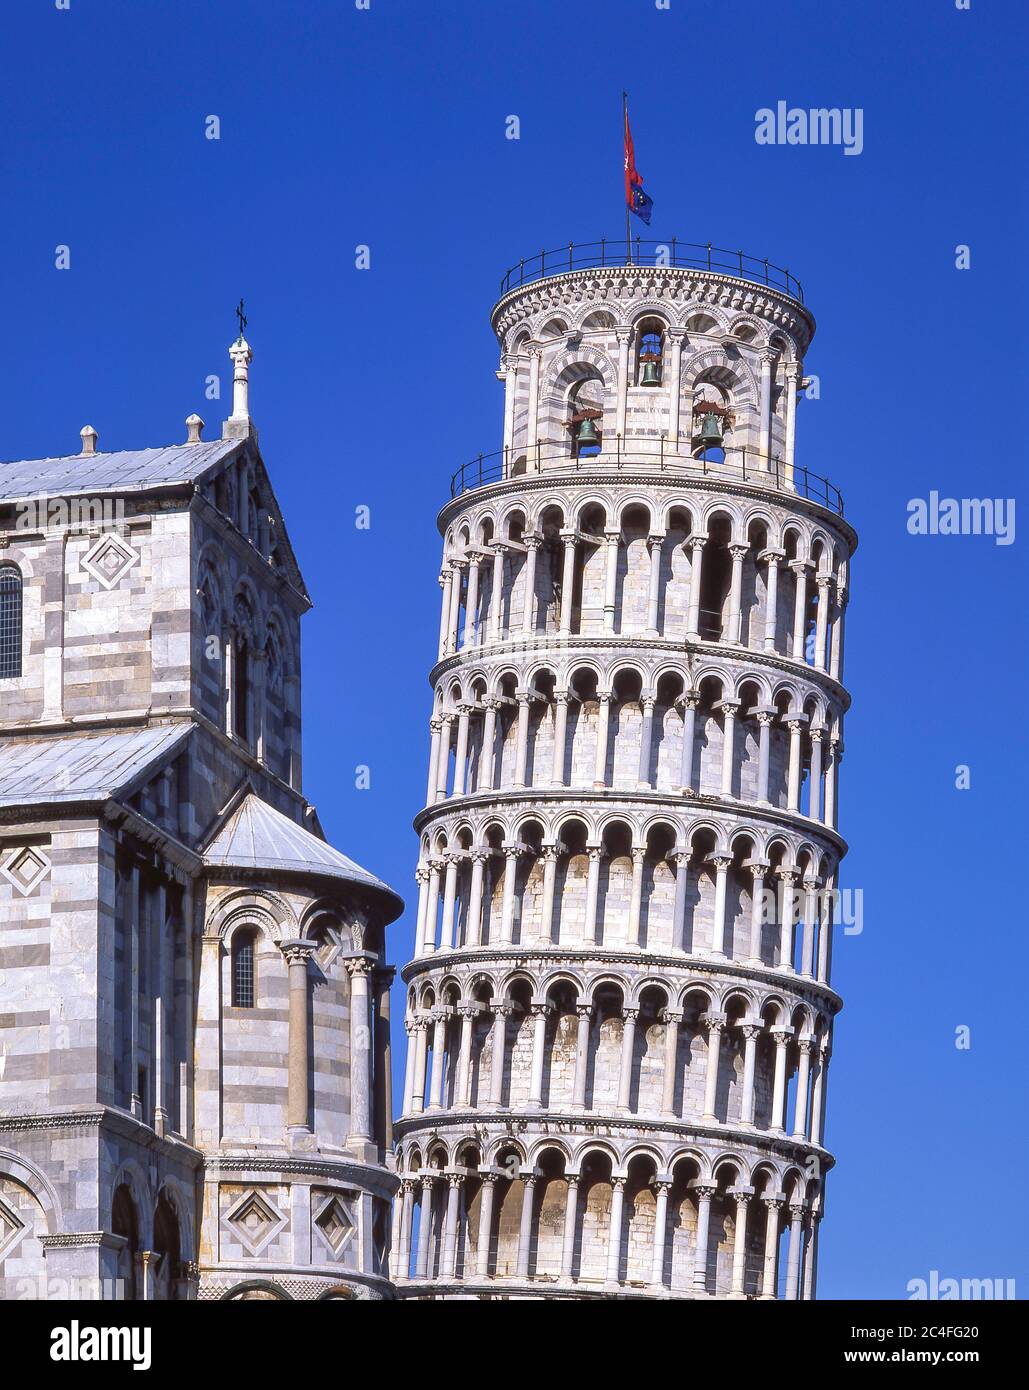 The Leaning Tower (Torre pendente di Pisa) and Cathedral (Duomo), Piazza  dei Miracoli, Pisa, Tuscany Region, Italy Stock Photo - Alamy